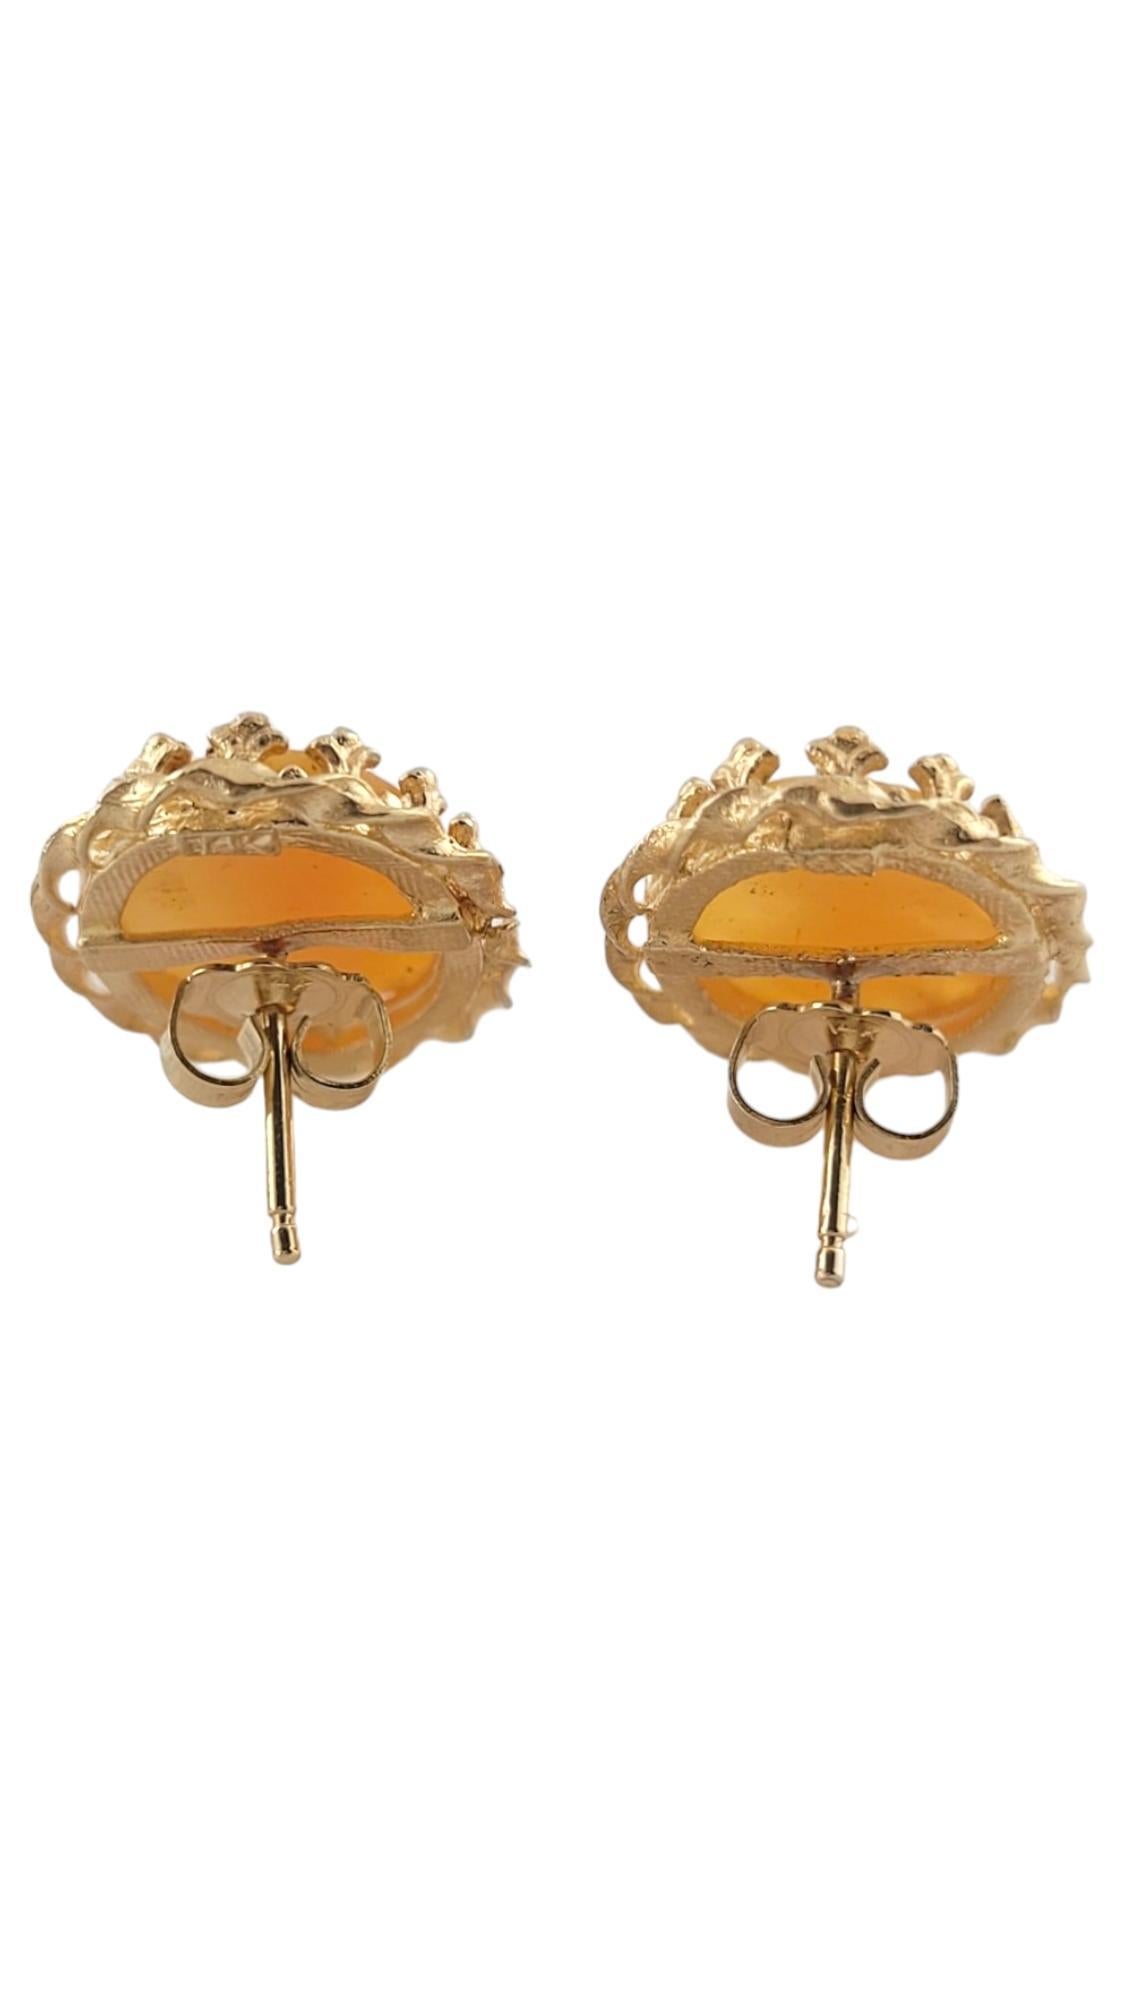 14K Yellow Gold Cameo Earrings #17385 In Good Condition For Sale In Washington Depot, CT